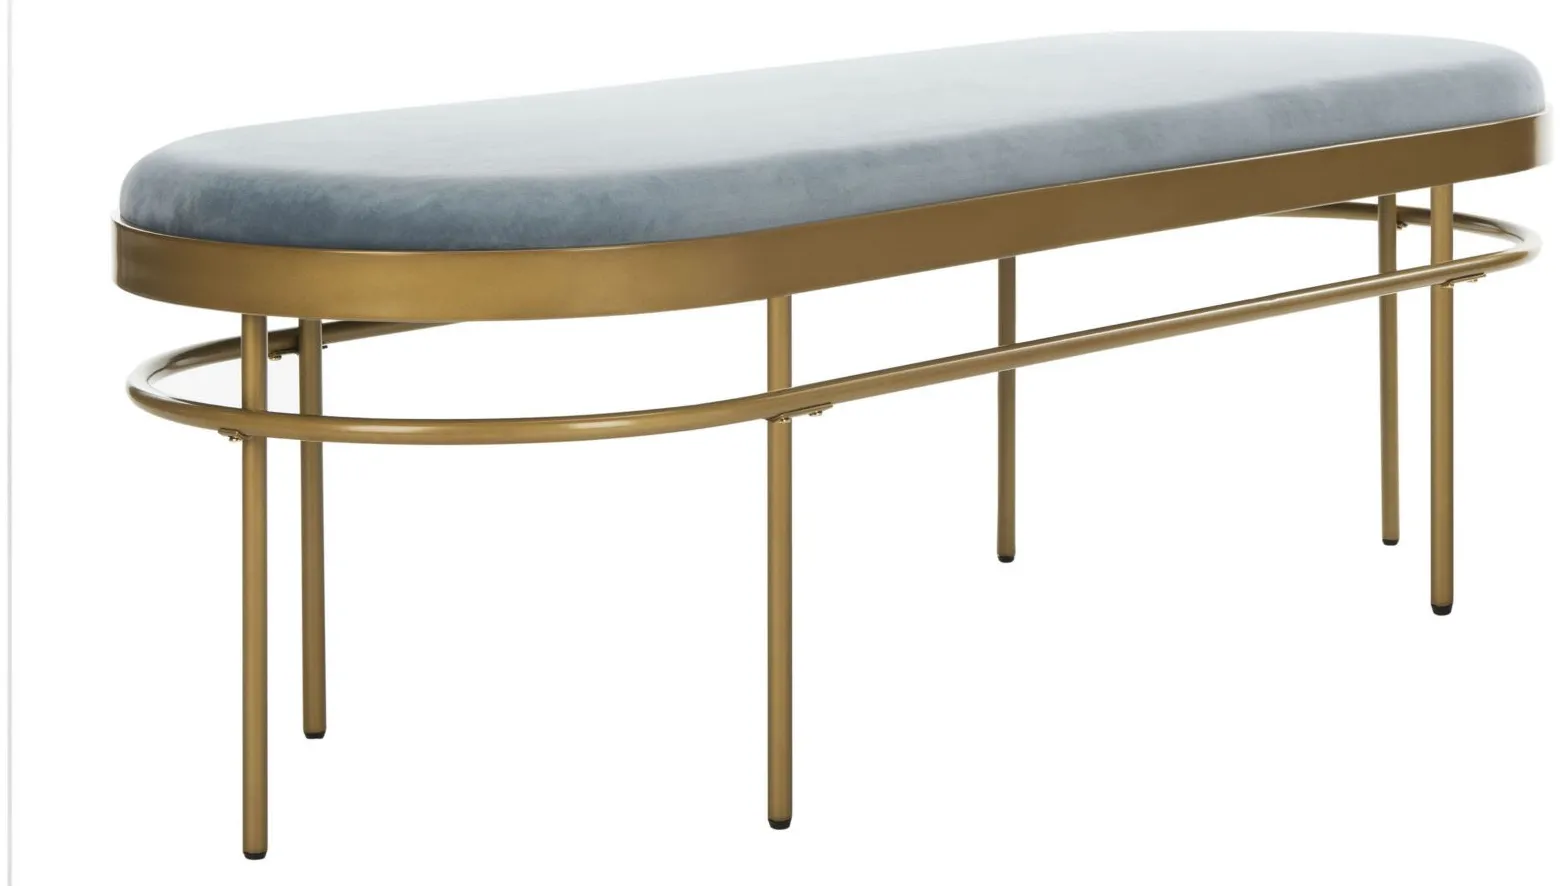 Sylvan Oval Bench in Slate Blue / Gold by Safavieh